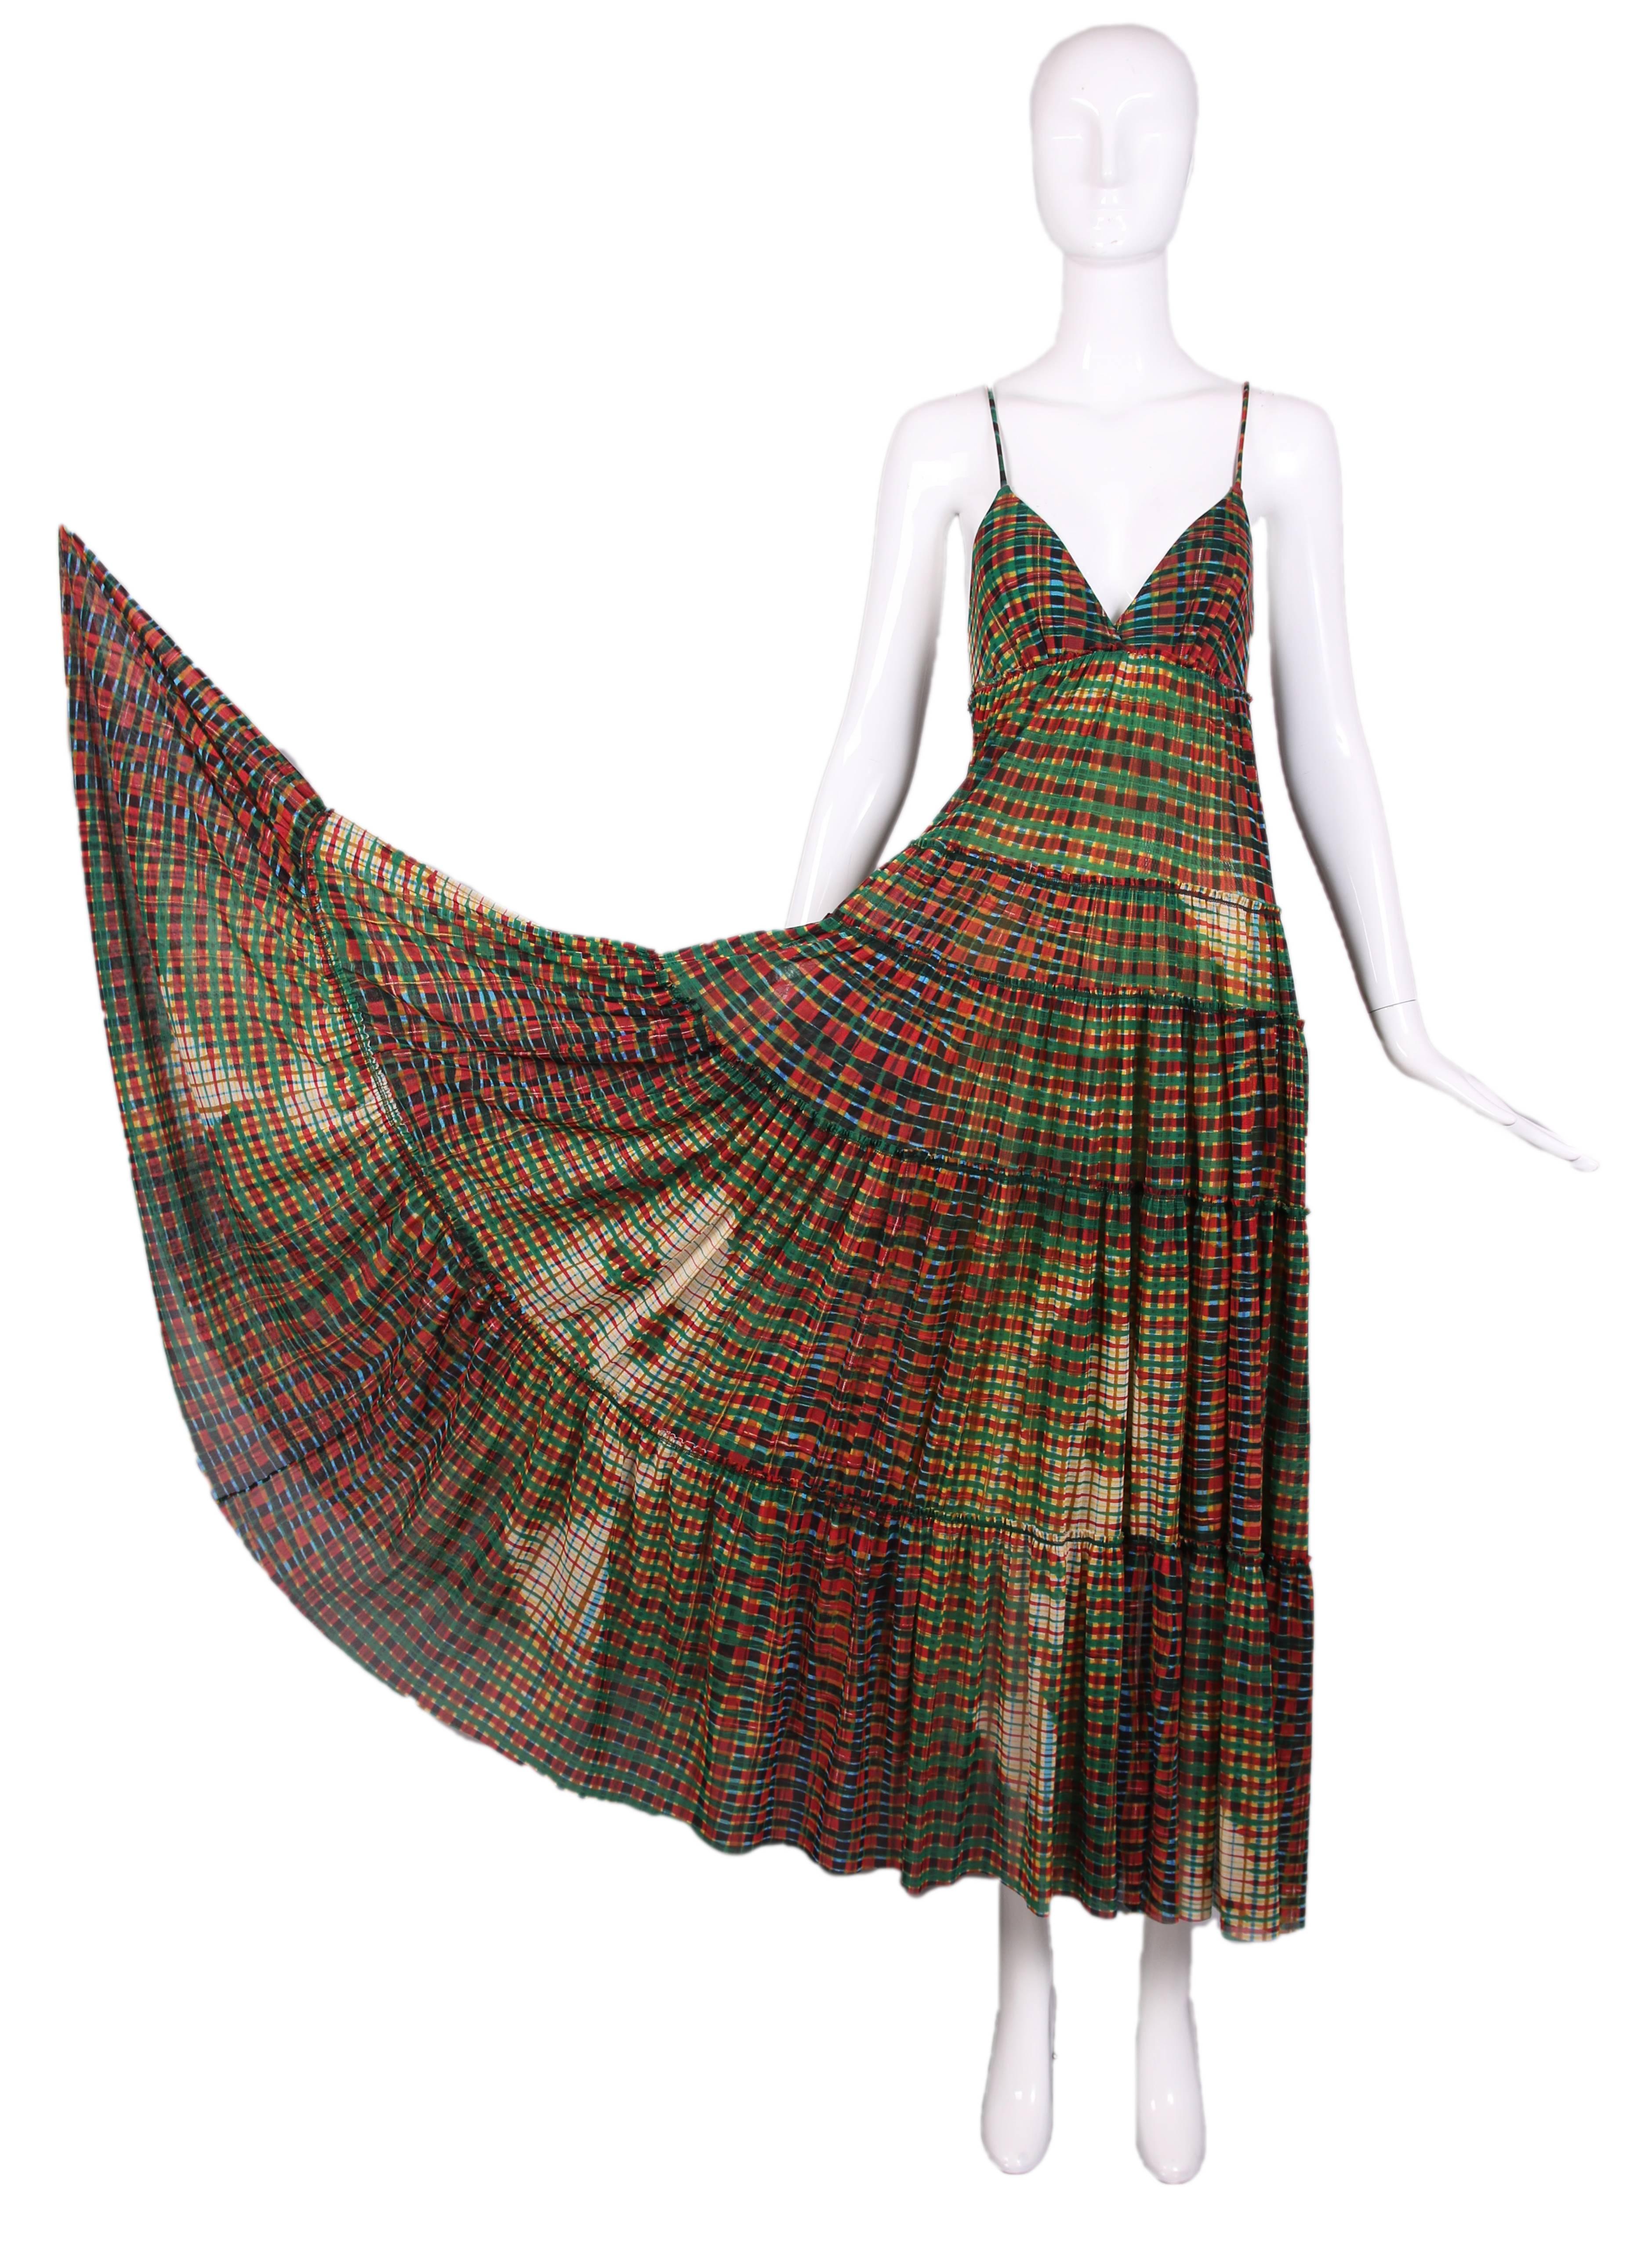 Vintage Jean-Paul Gaultier sheer mesh plaid multi-tiered, spaghetti strap, maxi dress with print of digital faces. In excellent condition. Size EU M.
MEASUREMENTS:
Bust - 32